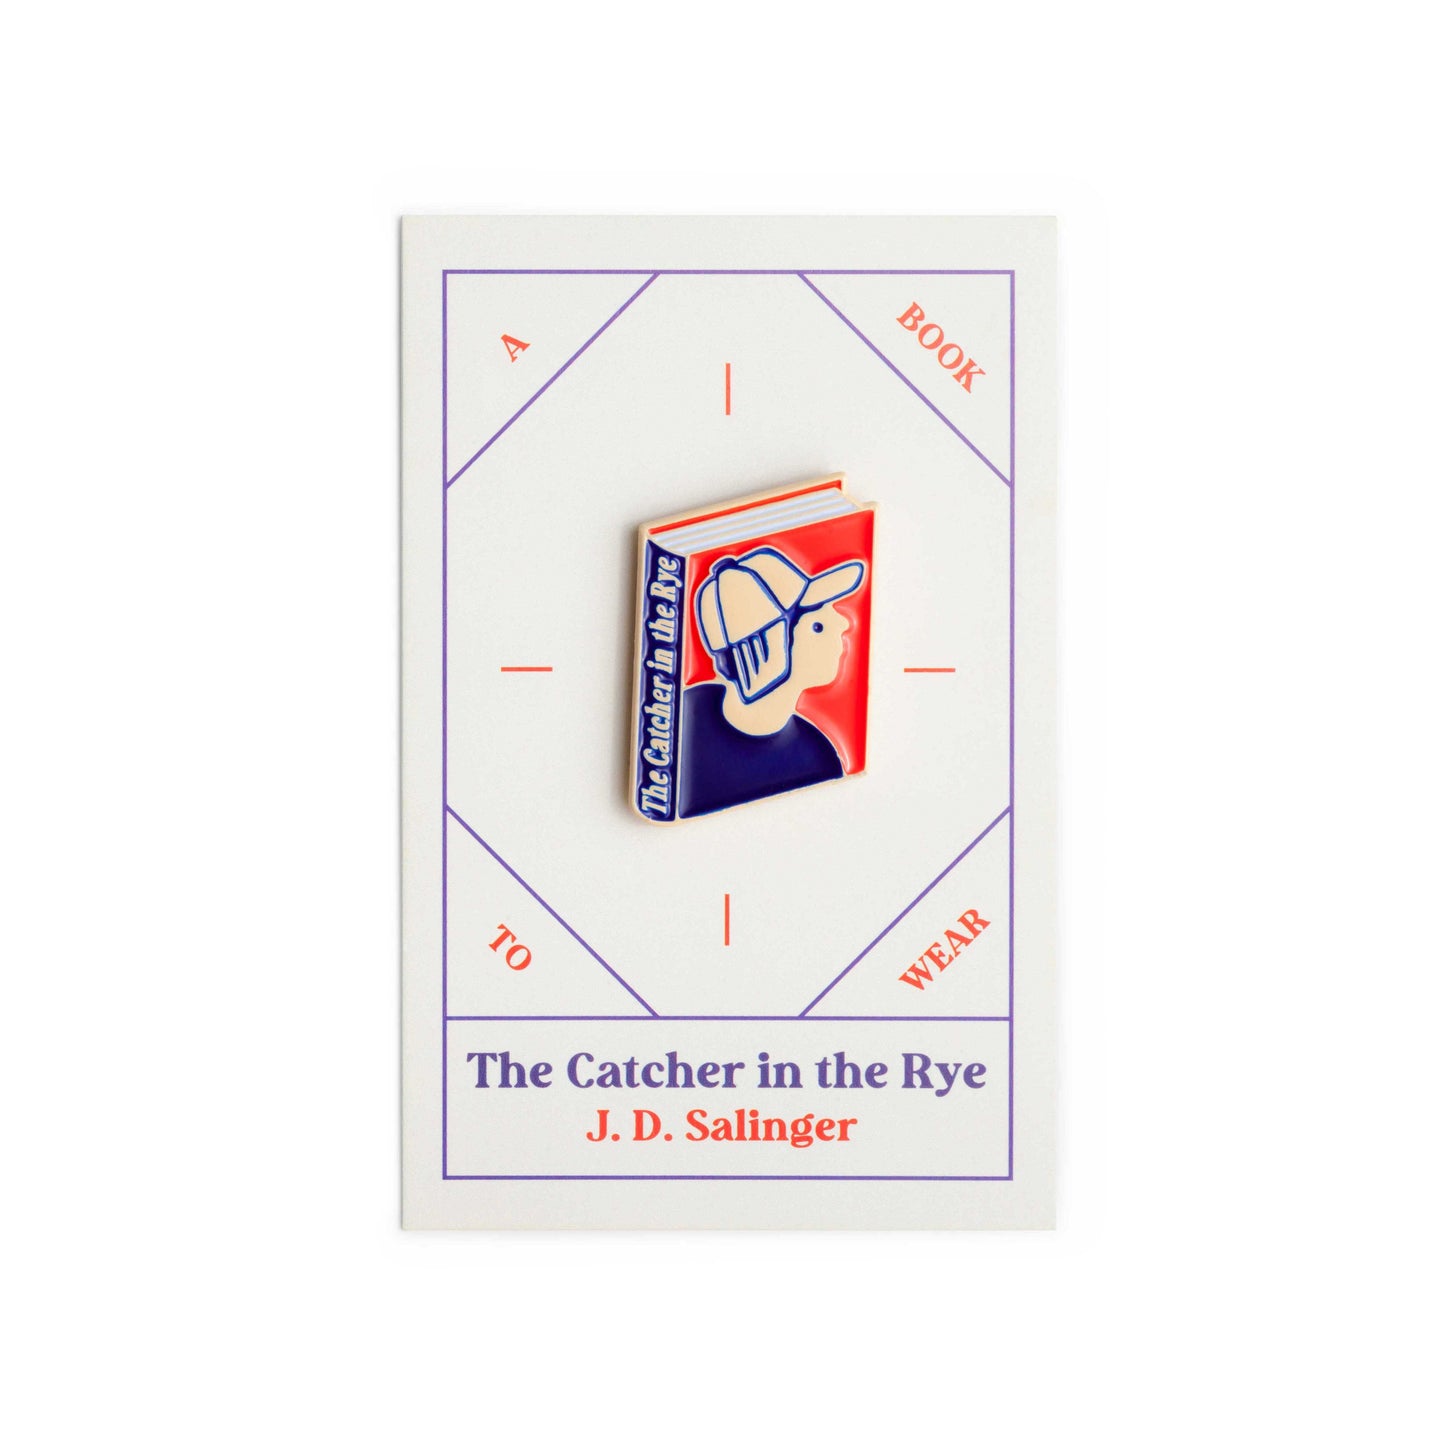 The Catcher Book in the Rye by J. D. Salinger Enamel Pin by Judy Kaufmann with packaging